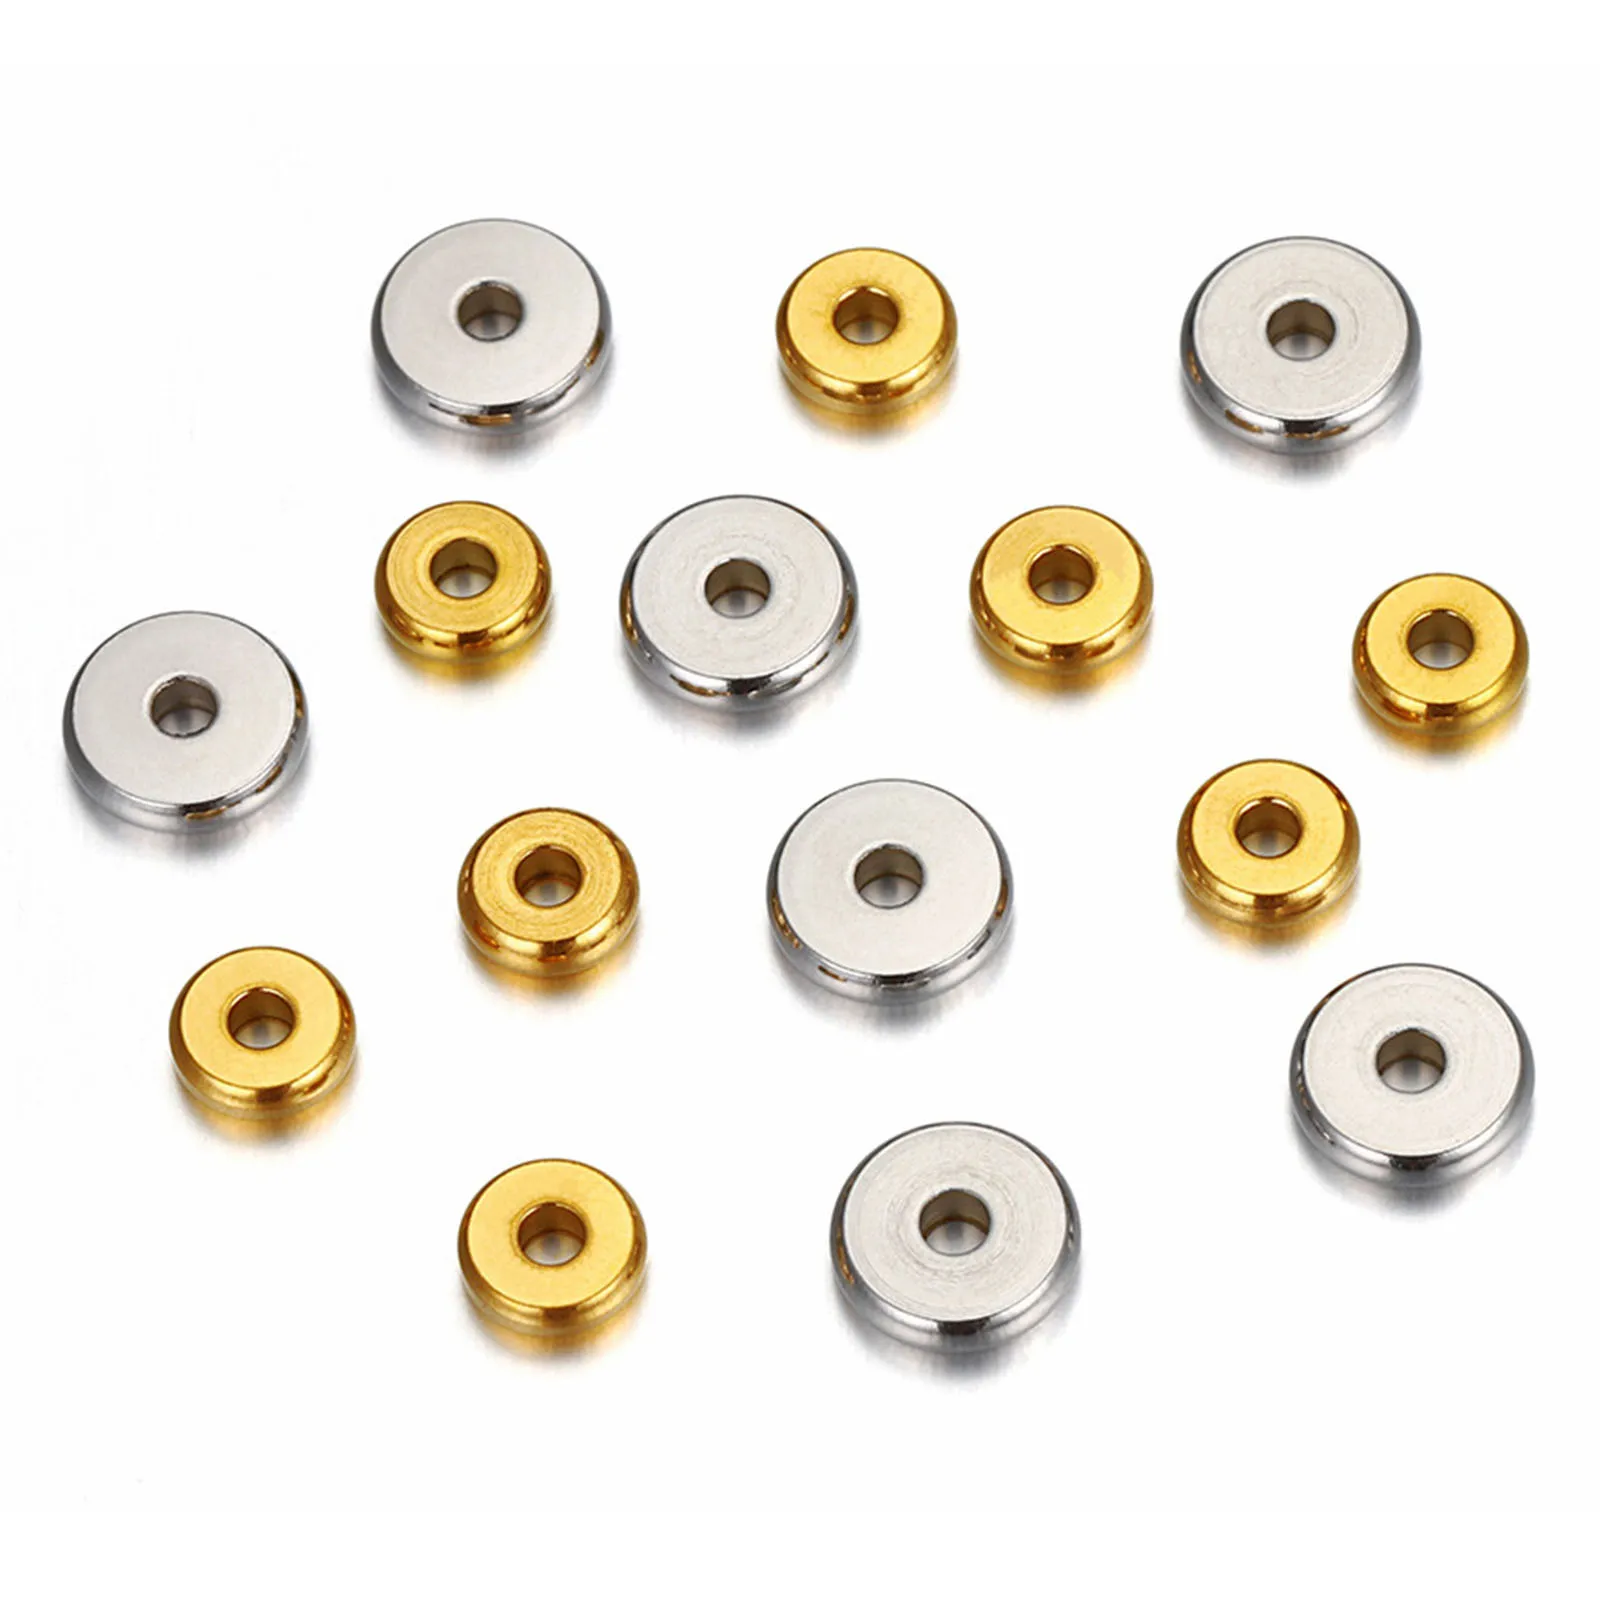 

50PCs No Fade Stainless Steel Beads Flat Round Spacer Beads Gold Color Bead For Diy Bracelet Jewlery Making Needlework Accessory